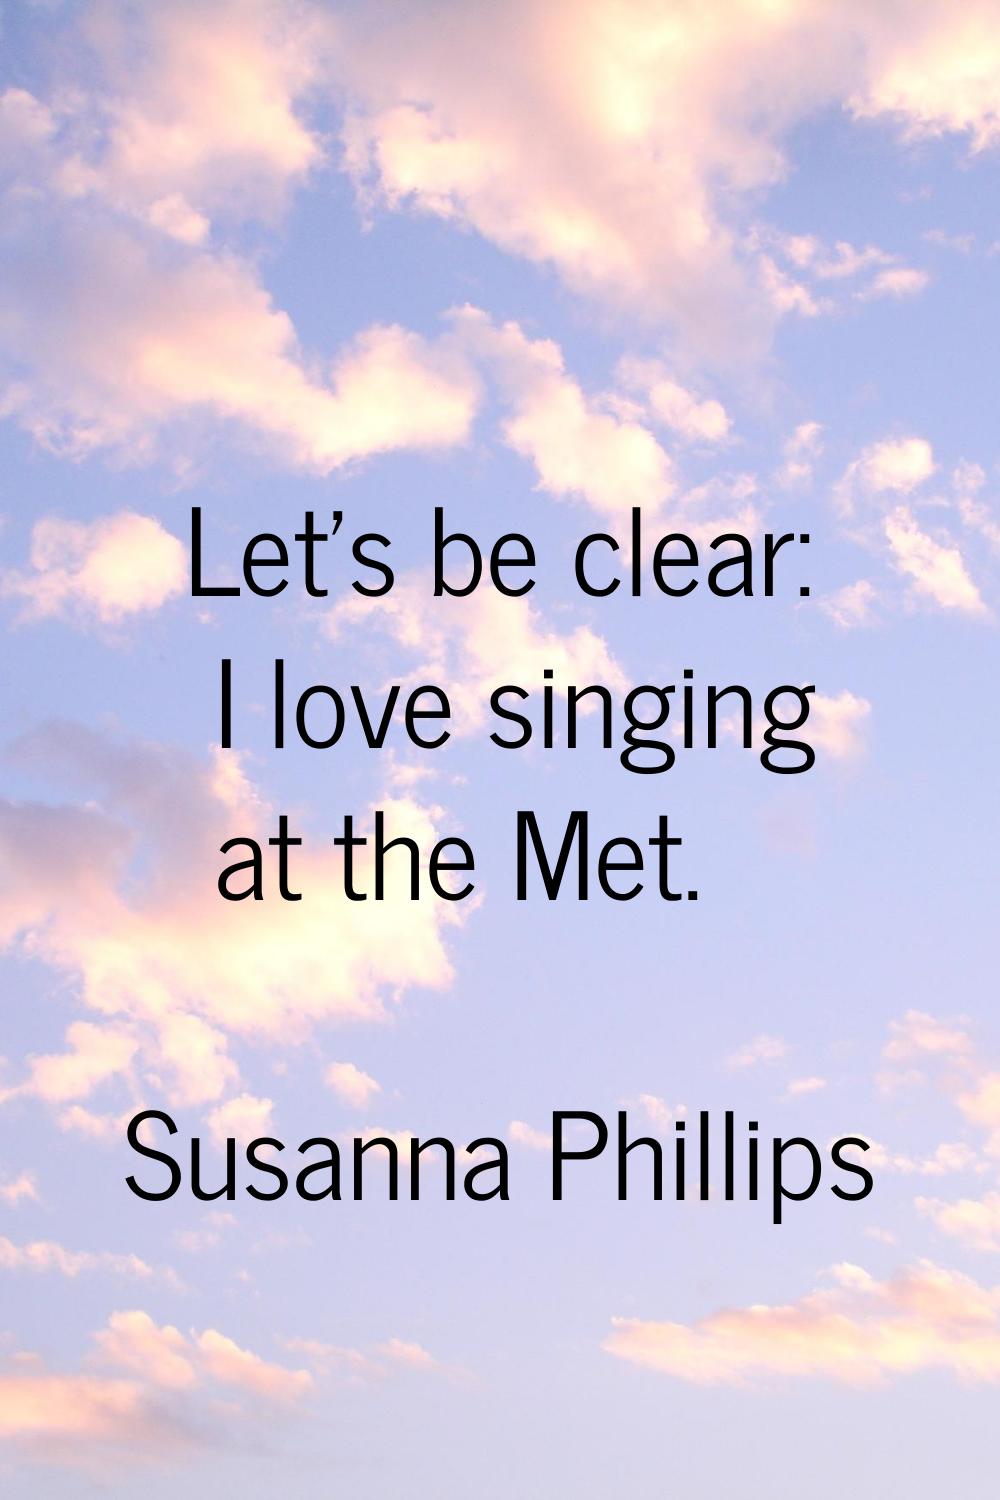 Let's be clear: I love singing at the Met.